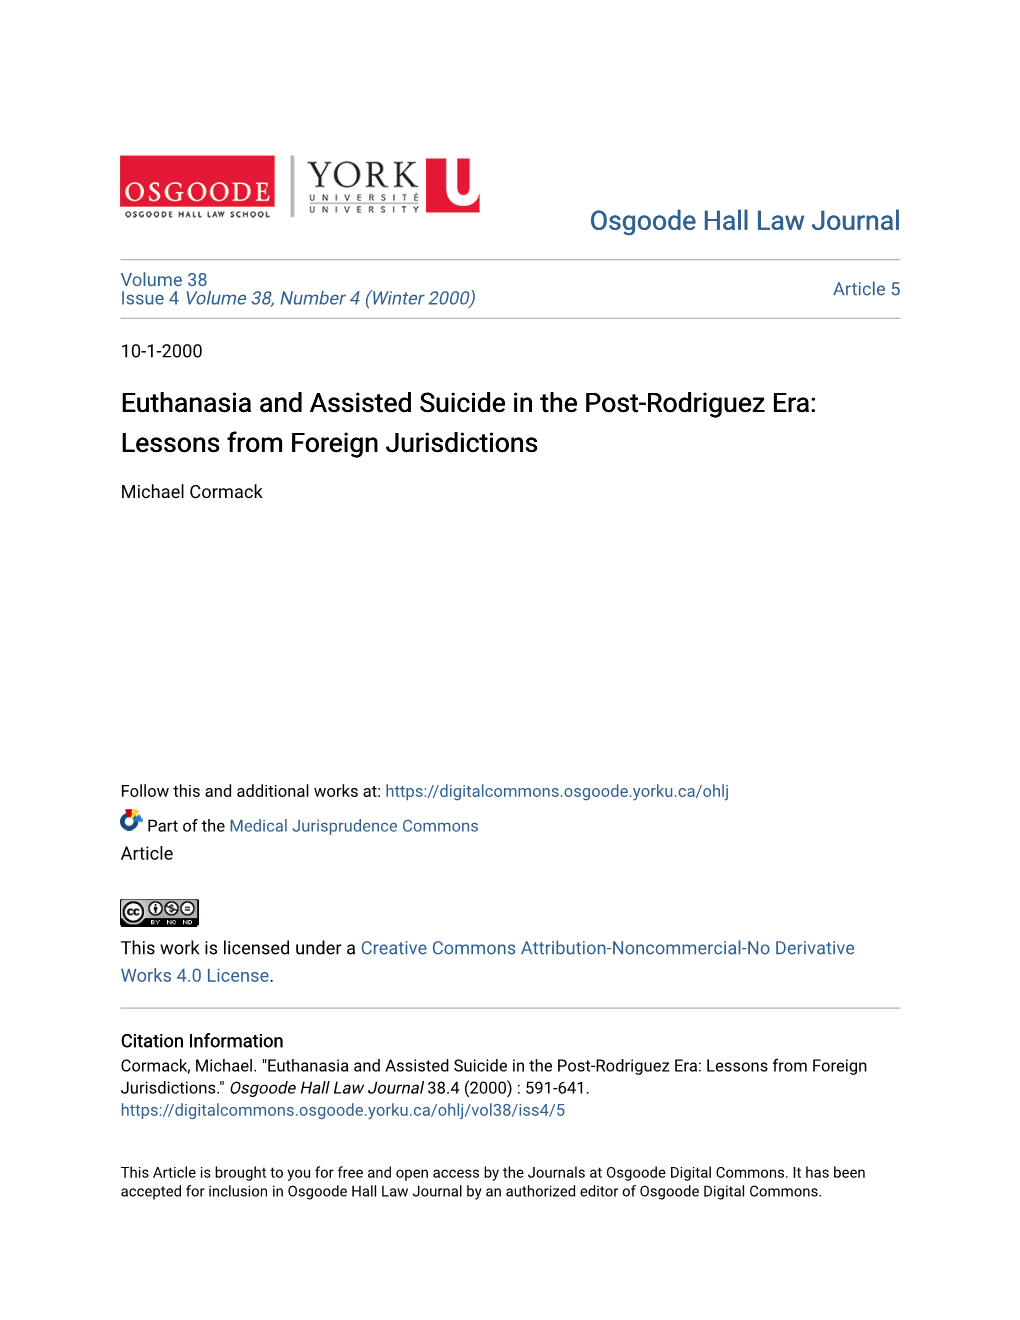 Euthanasia and Assisted Suicide in the Post-Rodriguez Era: Lessons from Foreign Jurisdictions